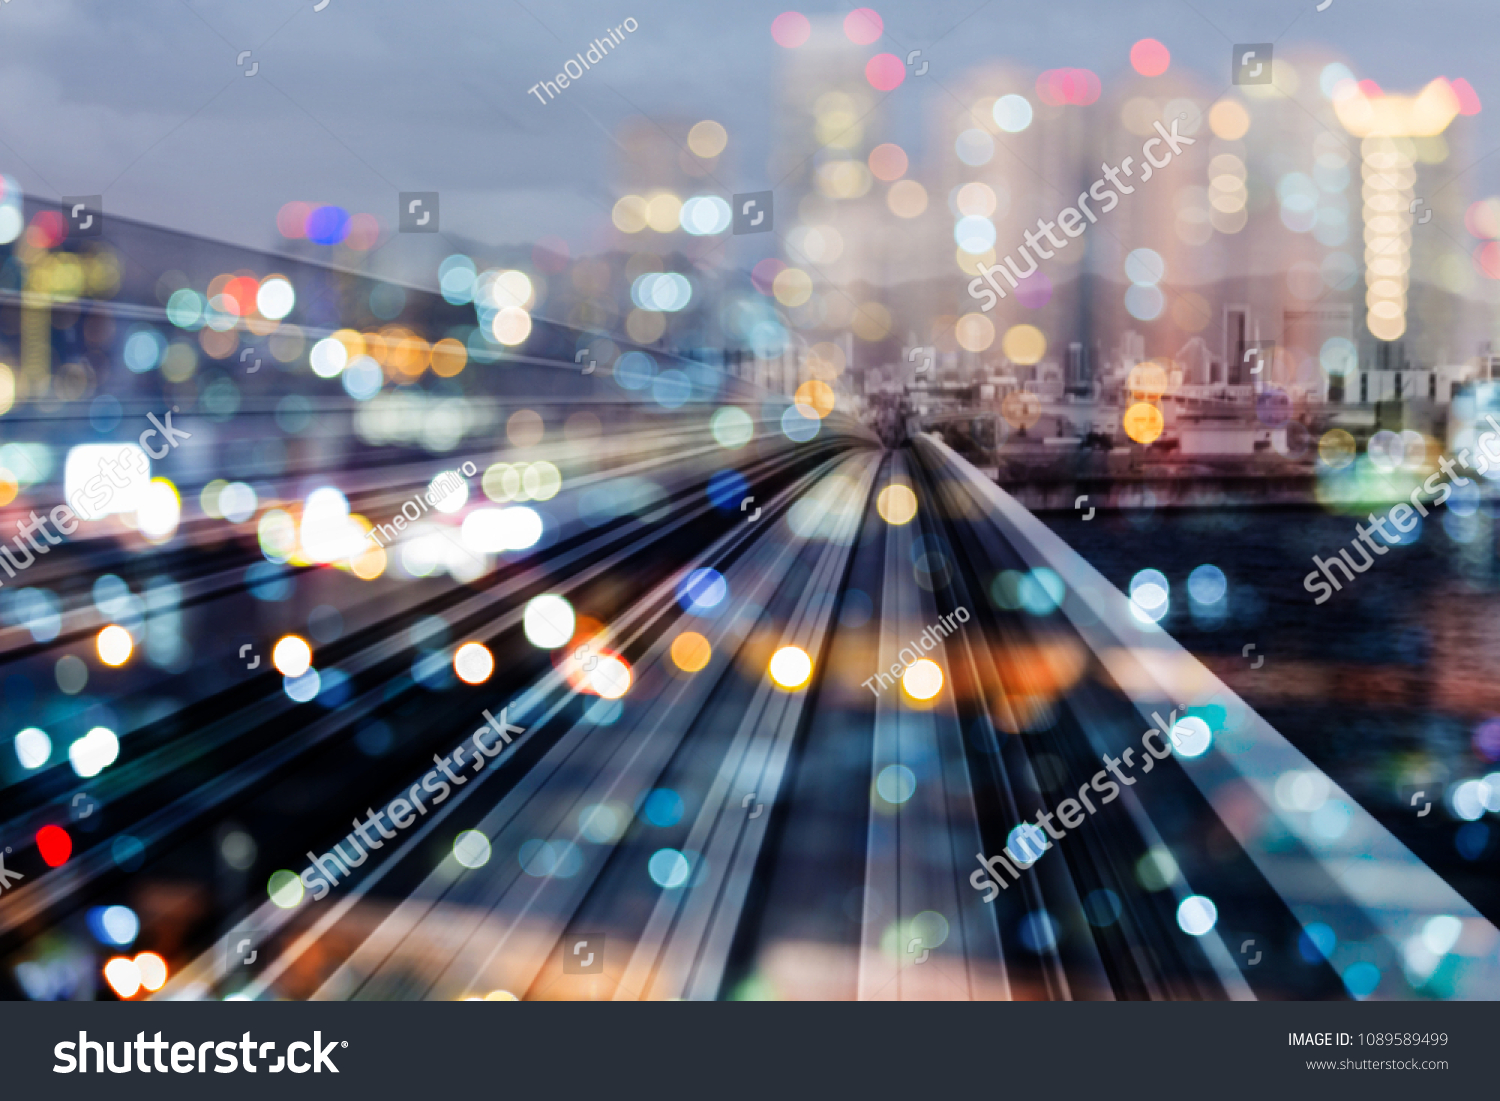 Bokeh city downtown night light with train track over, abstract background #1089589499